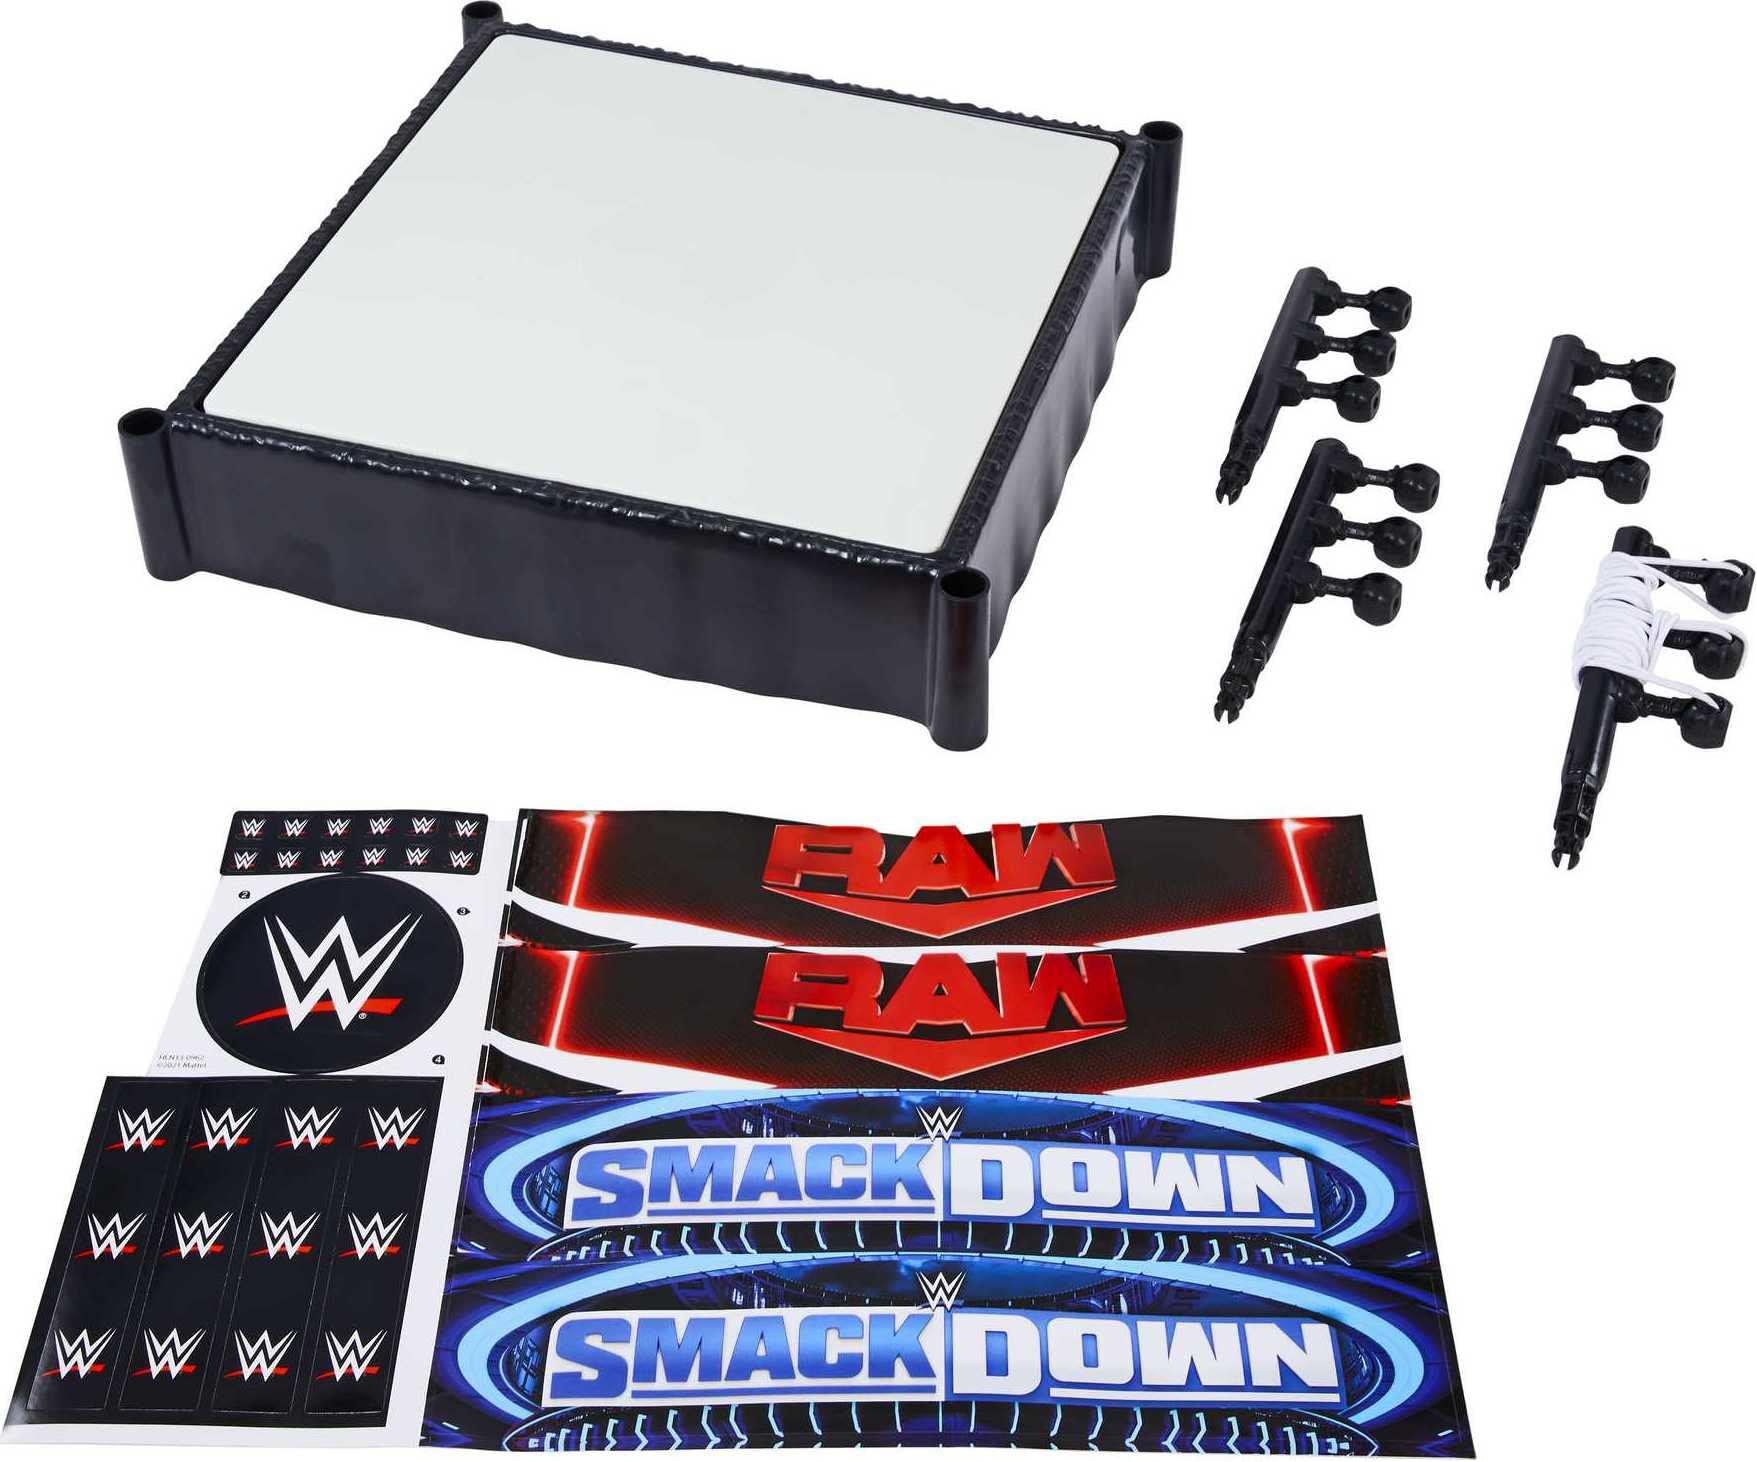 mattel wwe superstar ring, 14 inches with spring-loaded mat, 4 event apron stickers & pro-tension ropes for wwe action figure